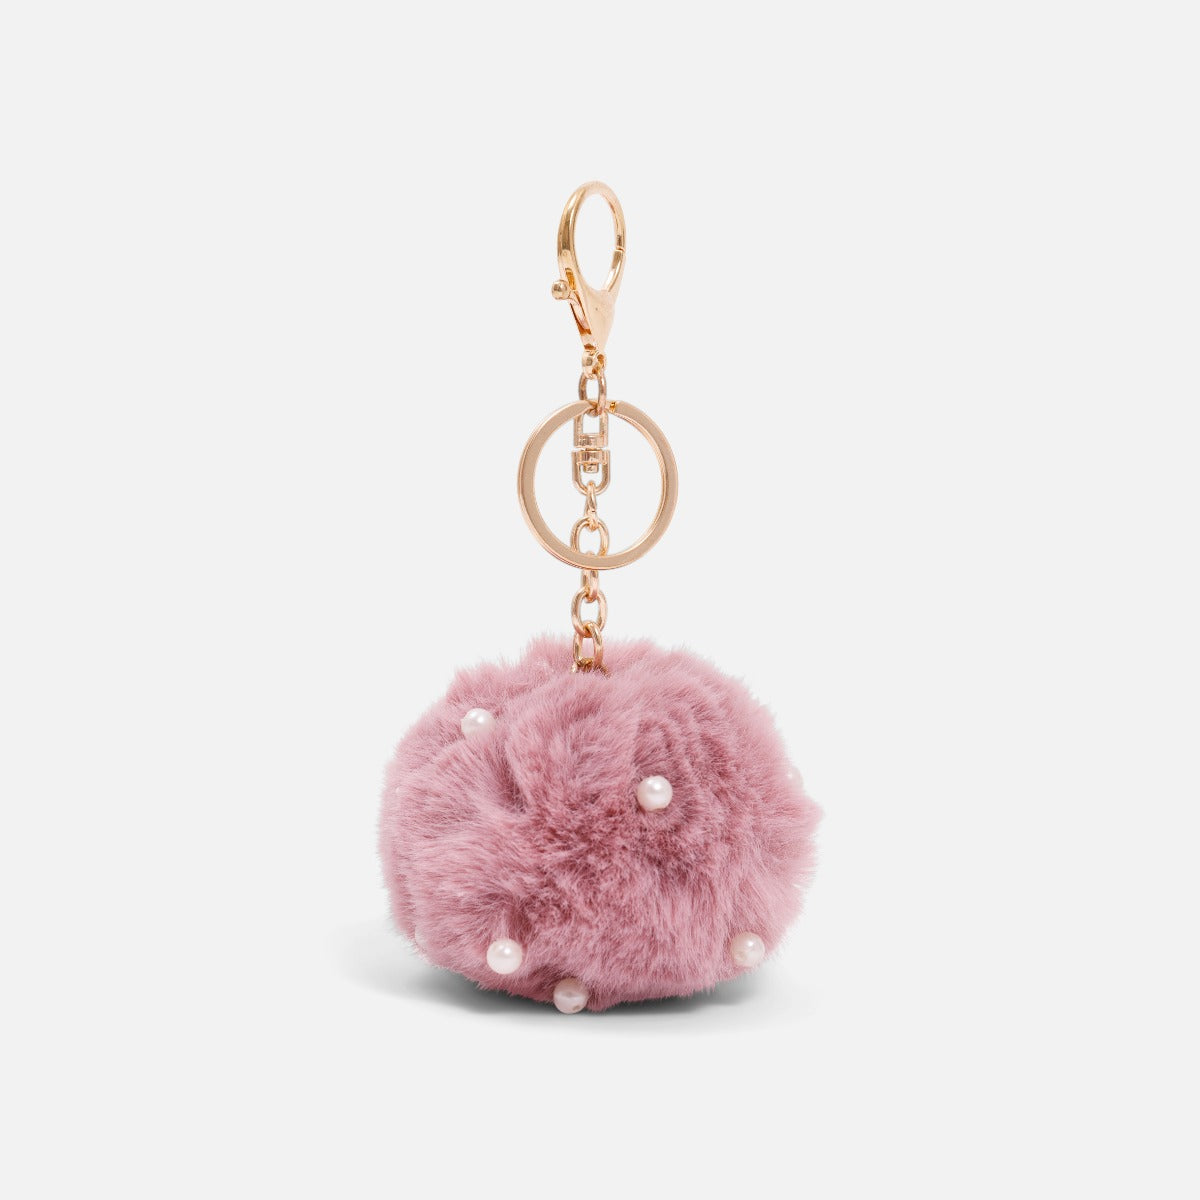 Pink pompon keychain with white pearls